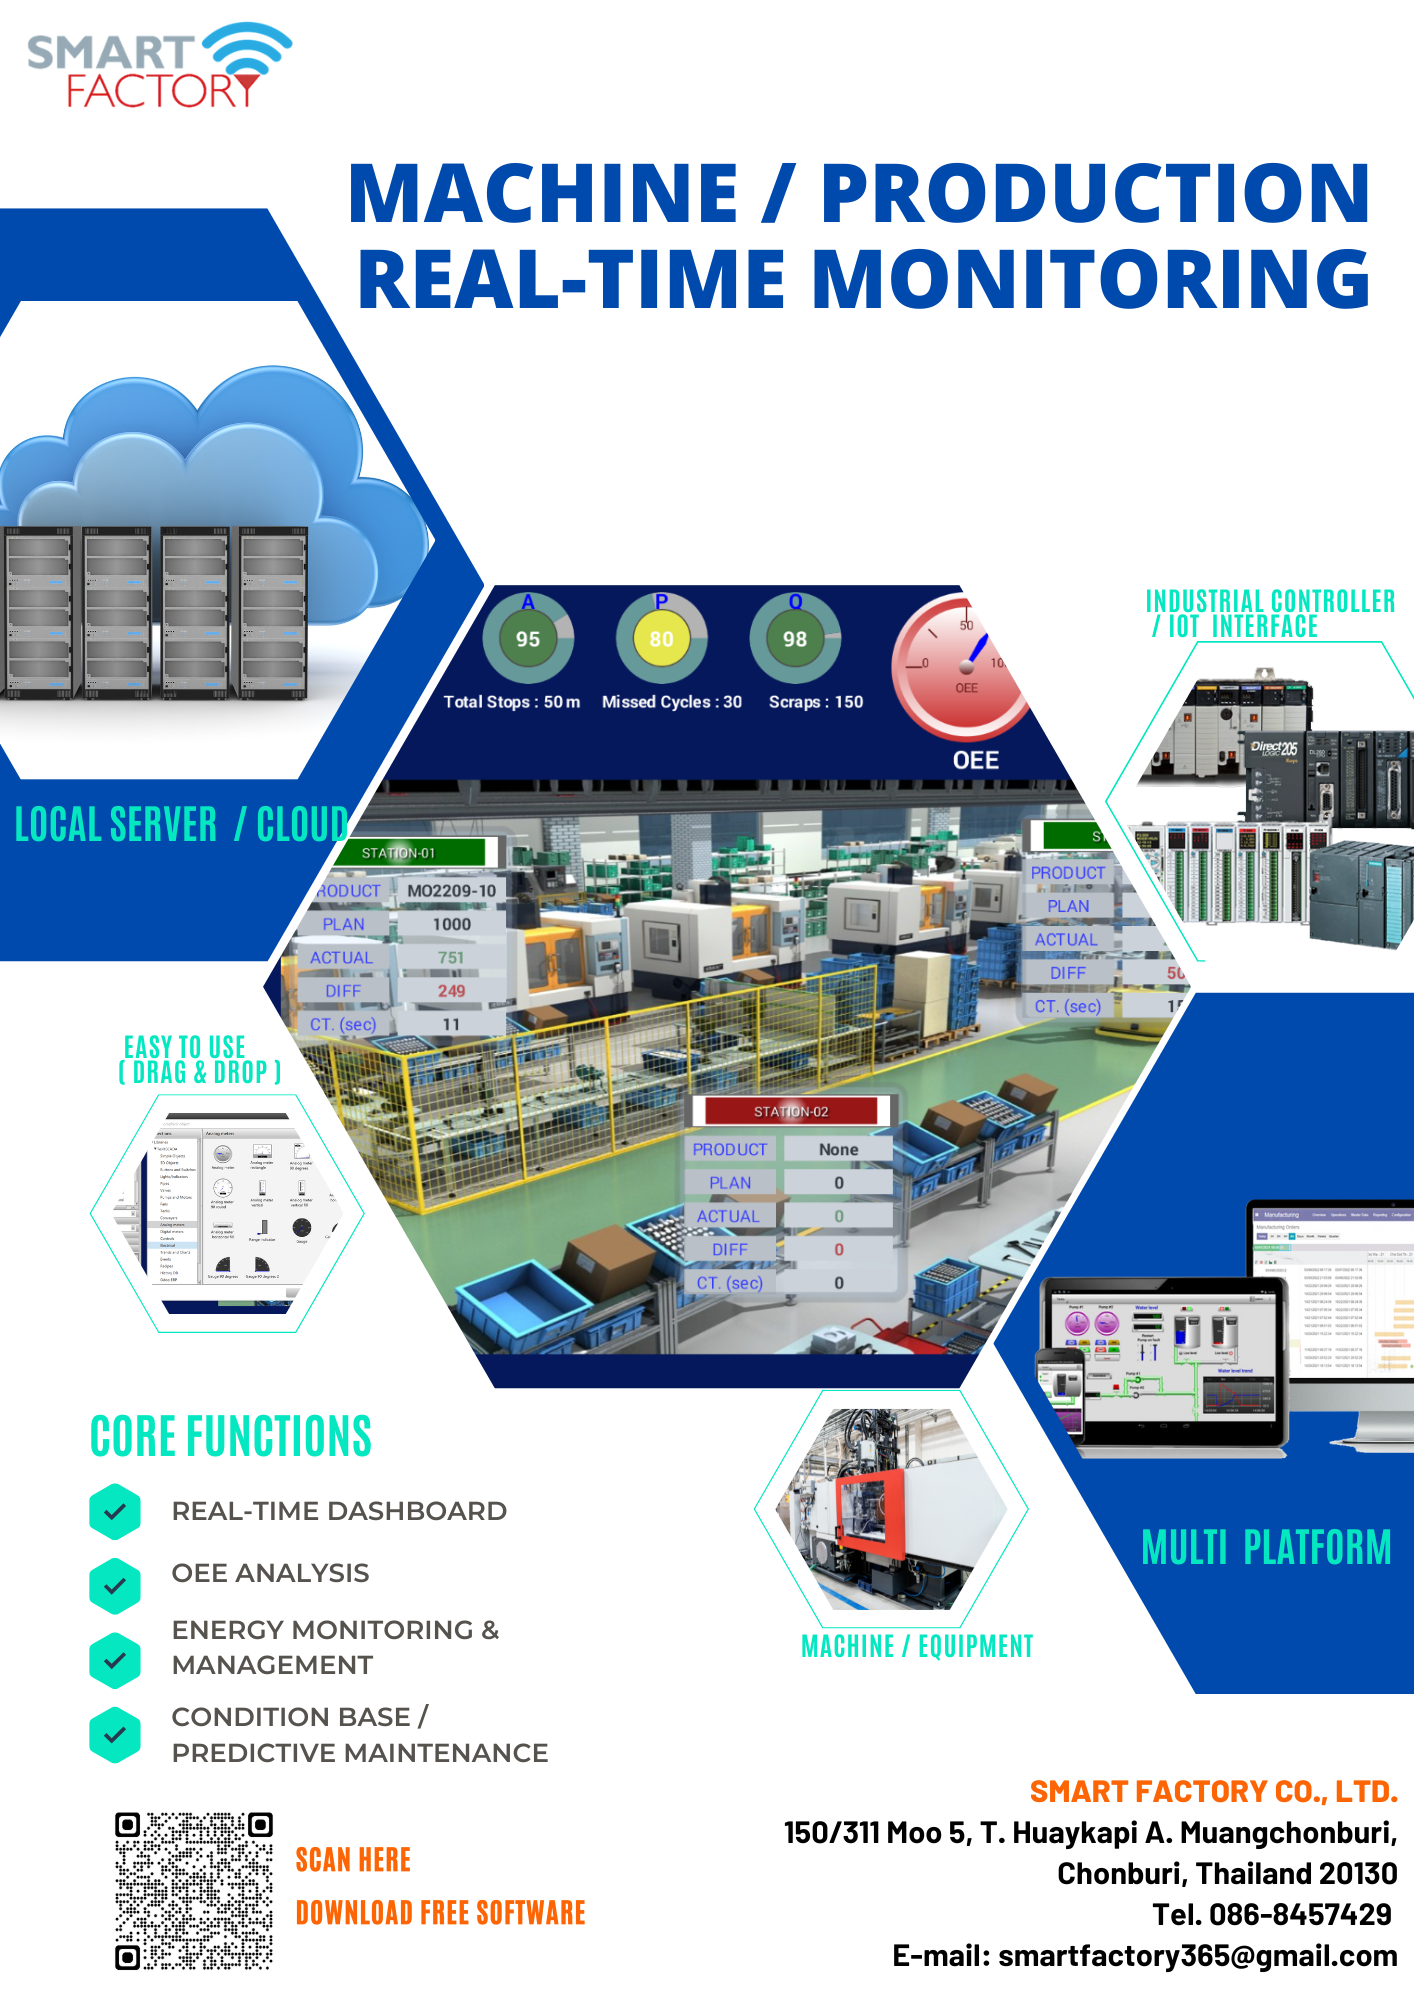 Machine / Production Realtime Monitoring